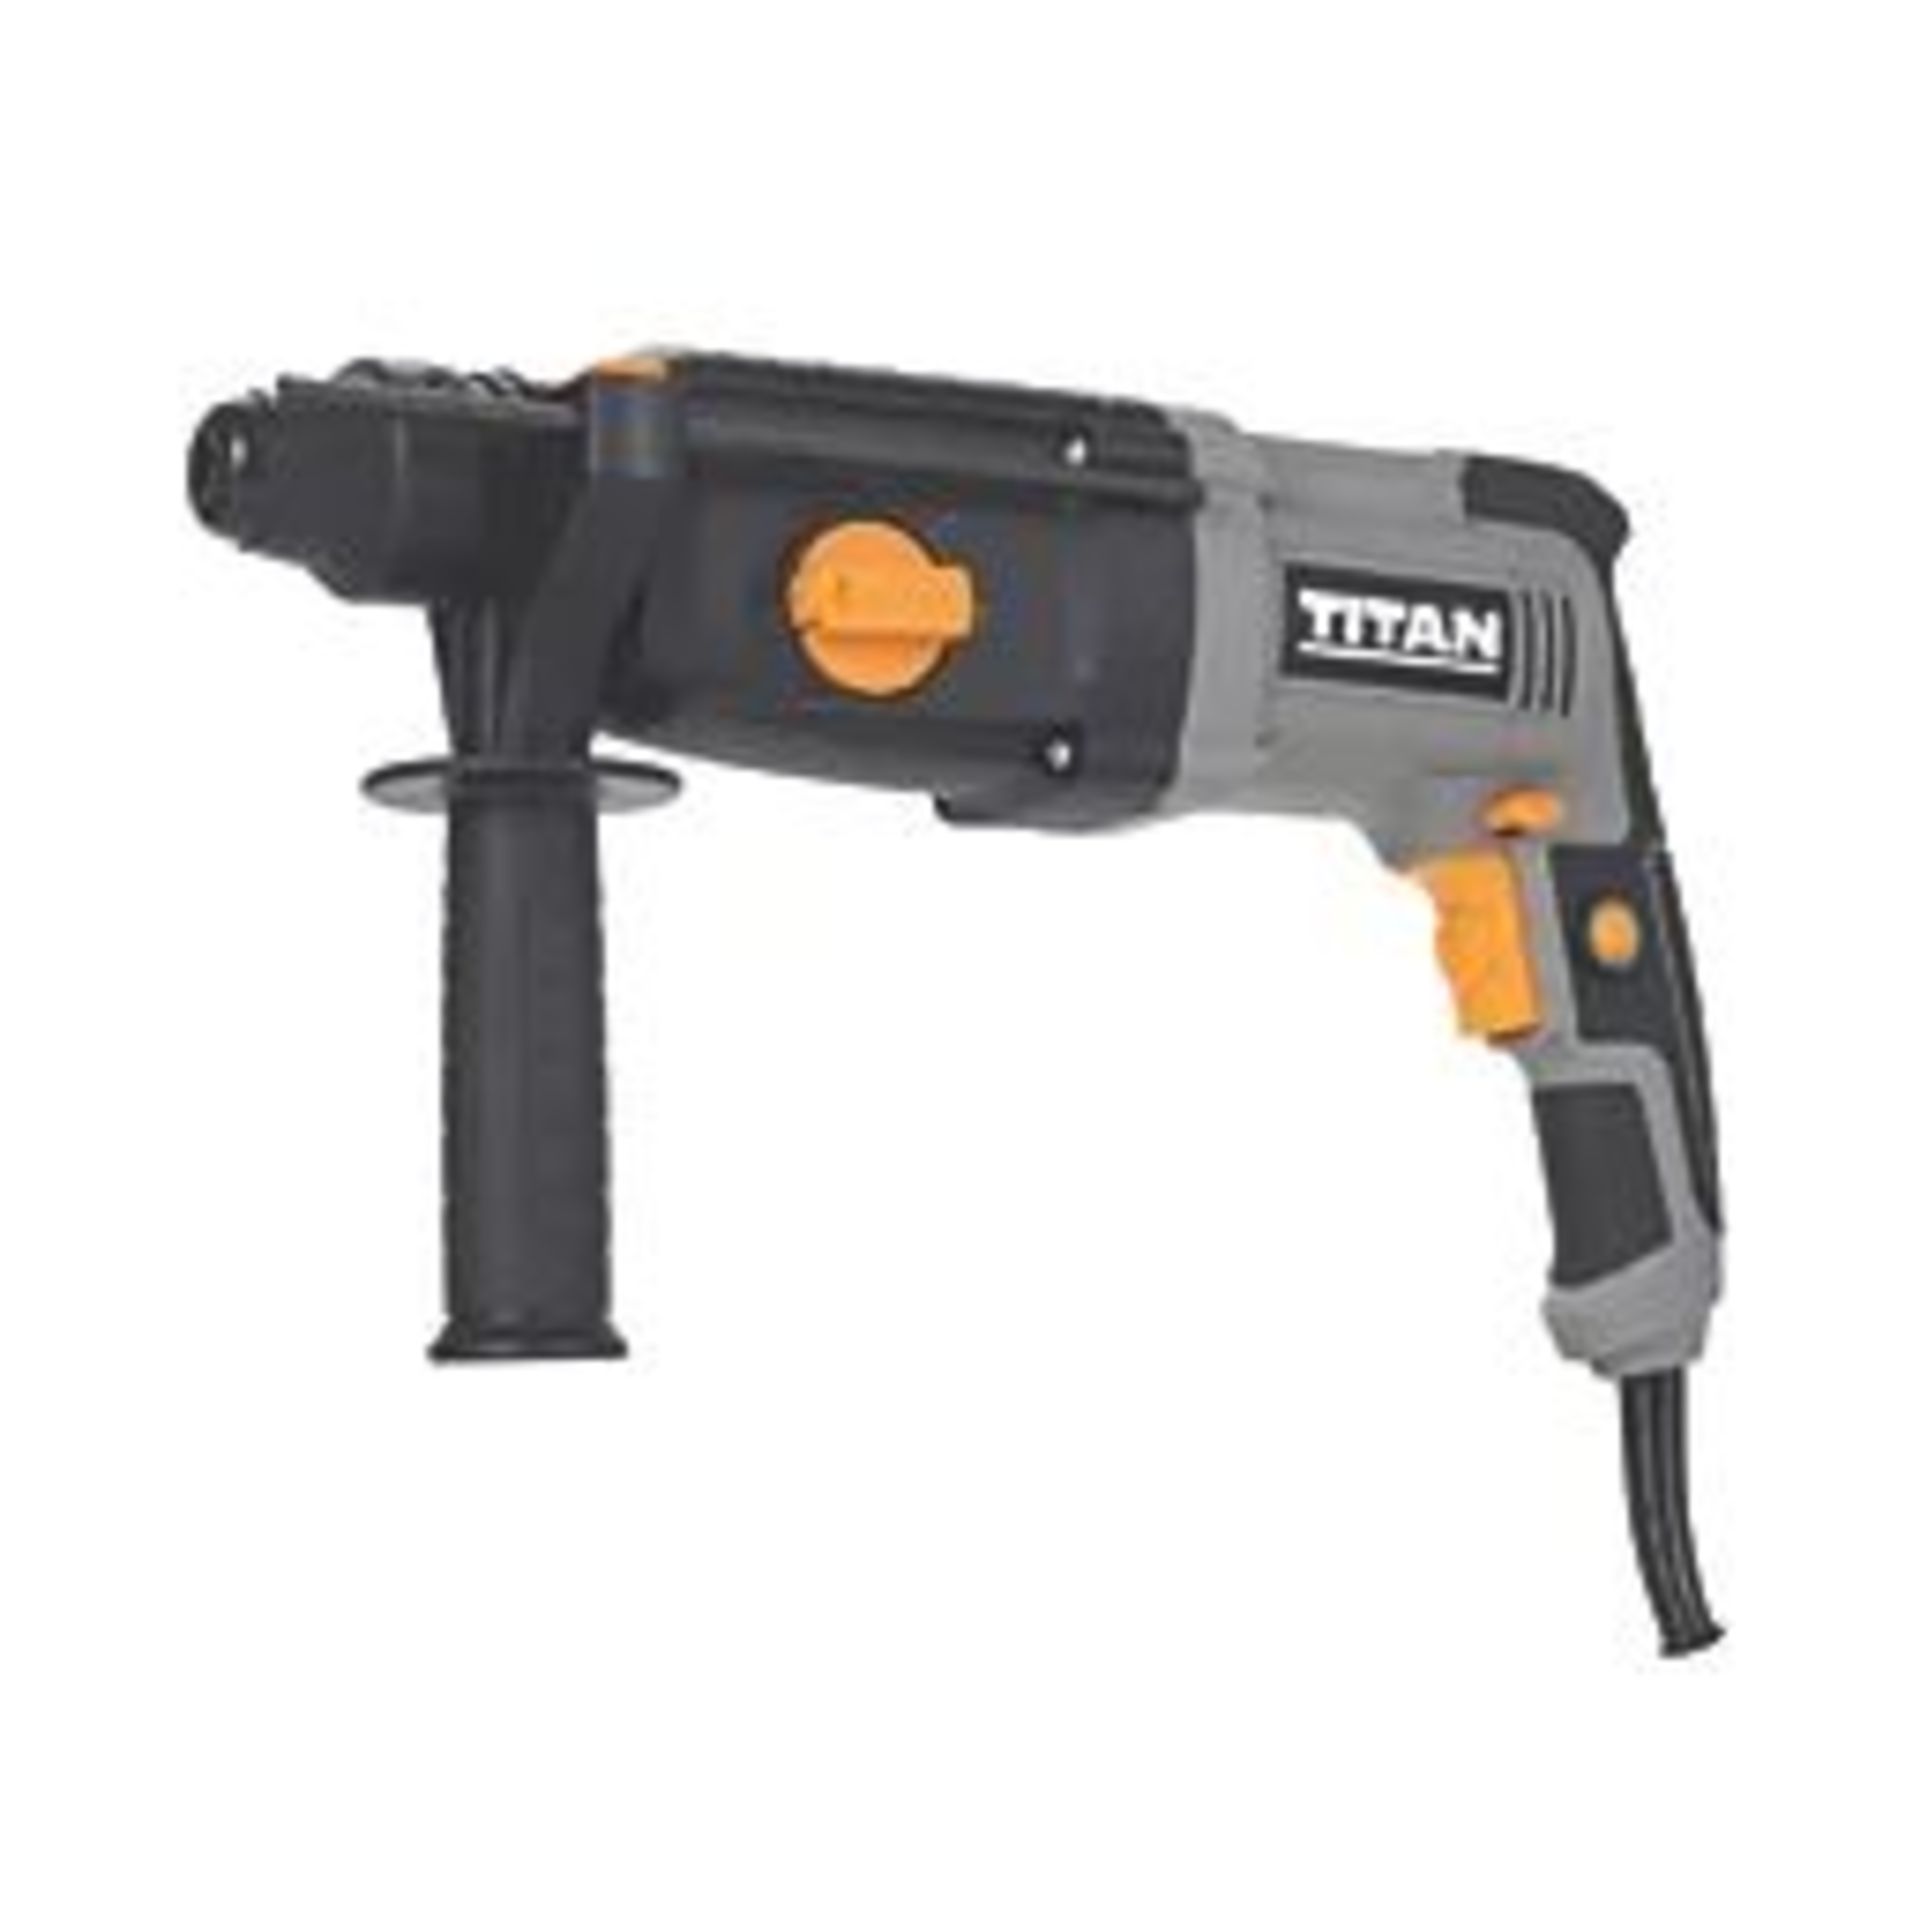 TITAN TTB872SDS 3.27KG ELECTRIC HAMMER DRILL 240V. - P4. Powerful 750W motor delivering up to 2.